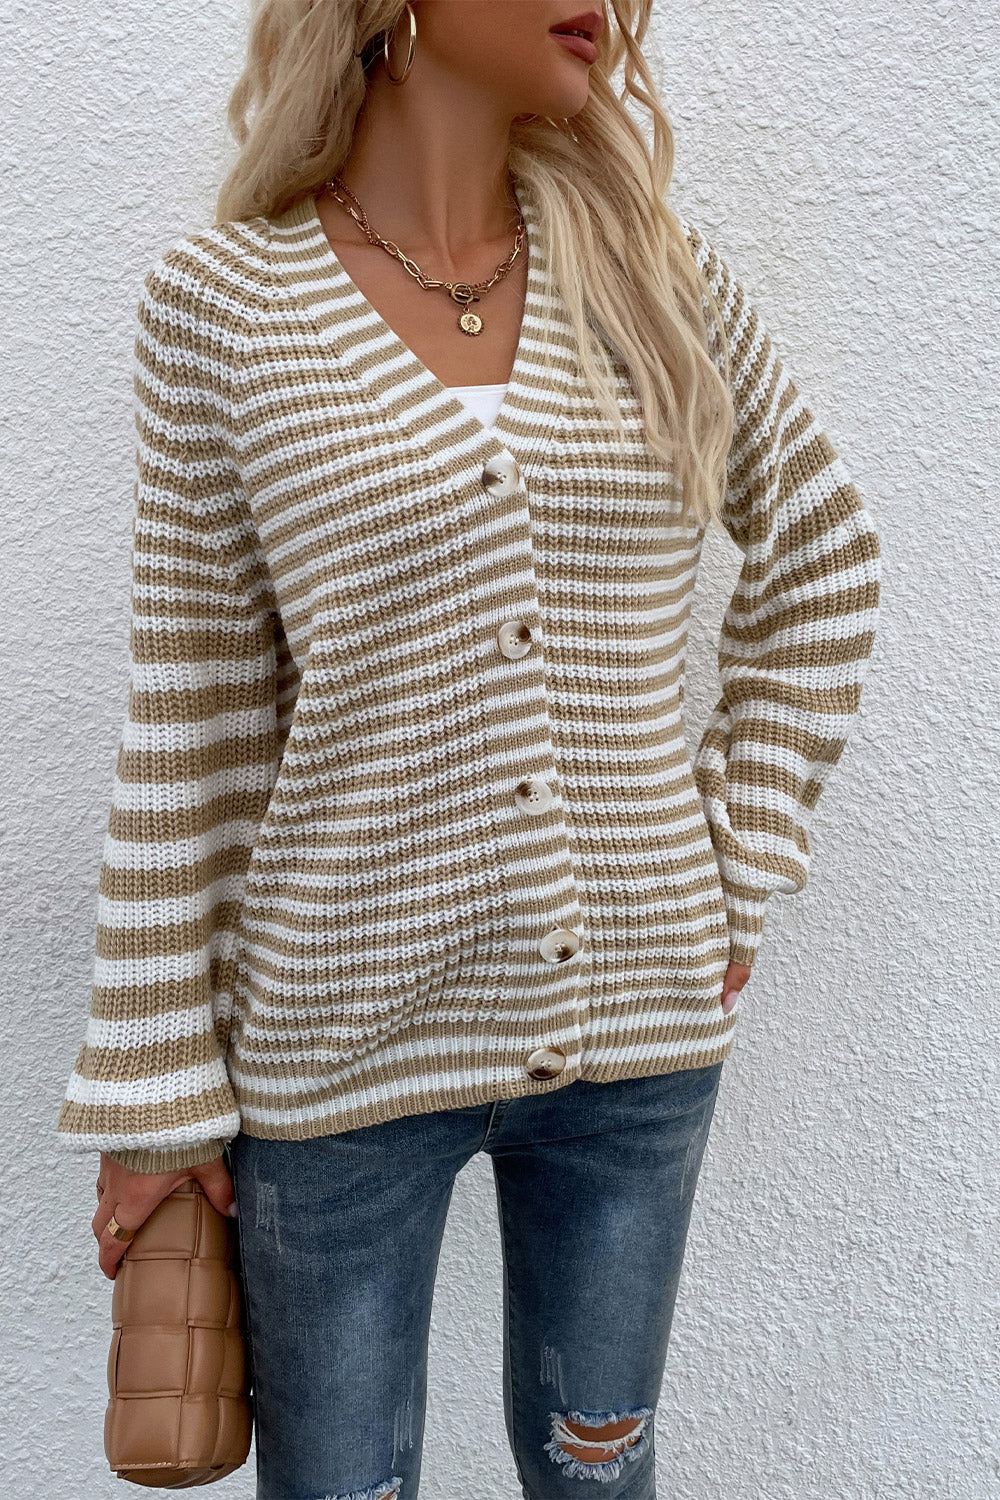 Striped V-Neck Button-Down Cardigan - Khaki / S - Women’s Clothing & Accessories - Shirts & Tops - 4 - 2024